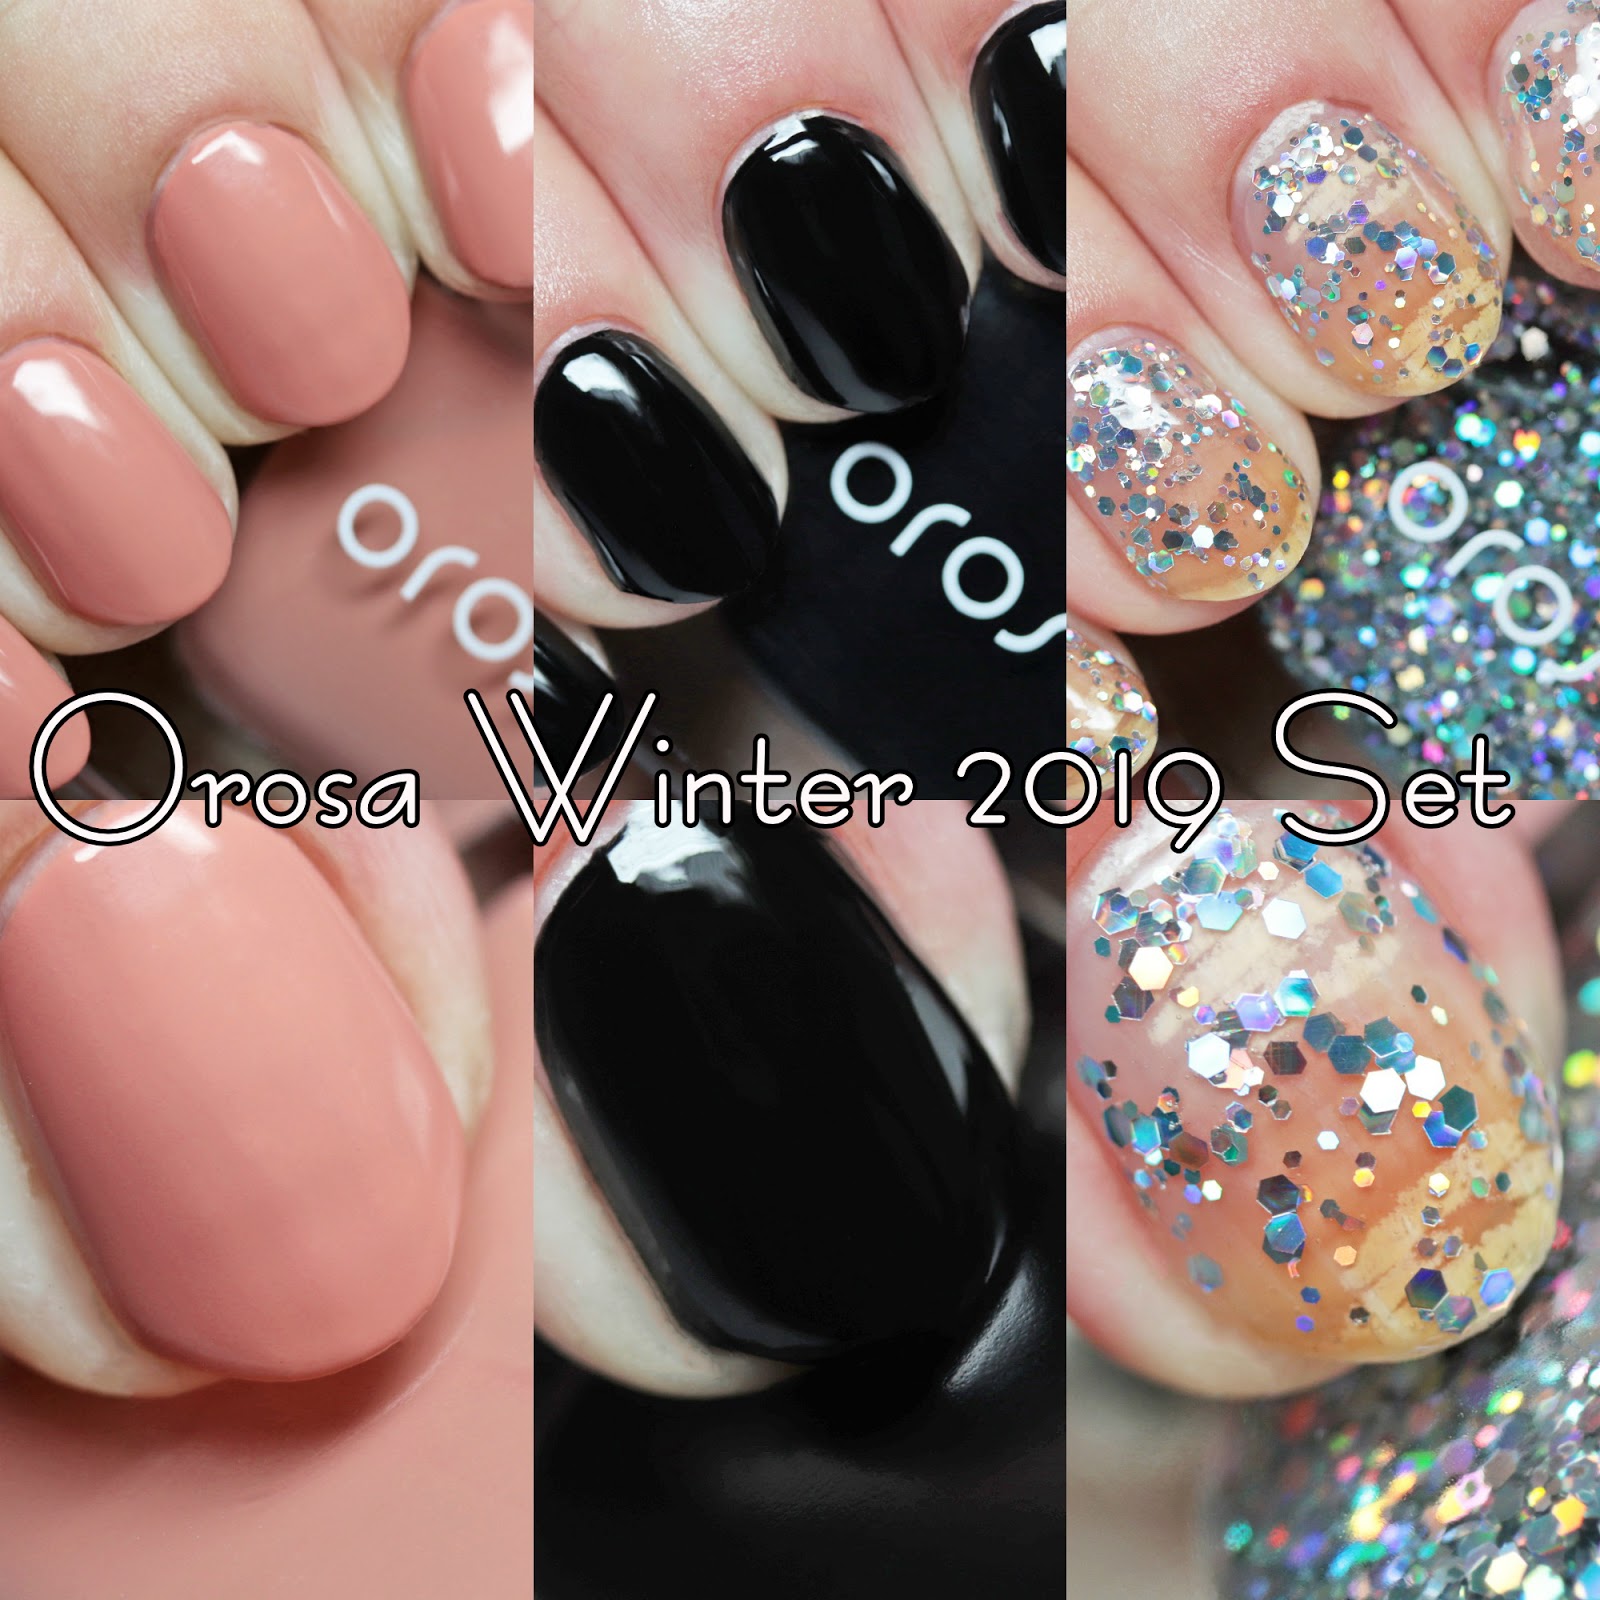 Nubar Venetian Glass Collection Review, Photos, Swatches (Part 2) | Nails, Nail  lacquer, Beauty nails